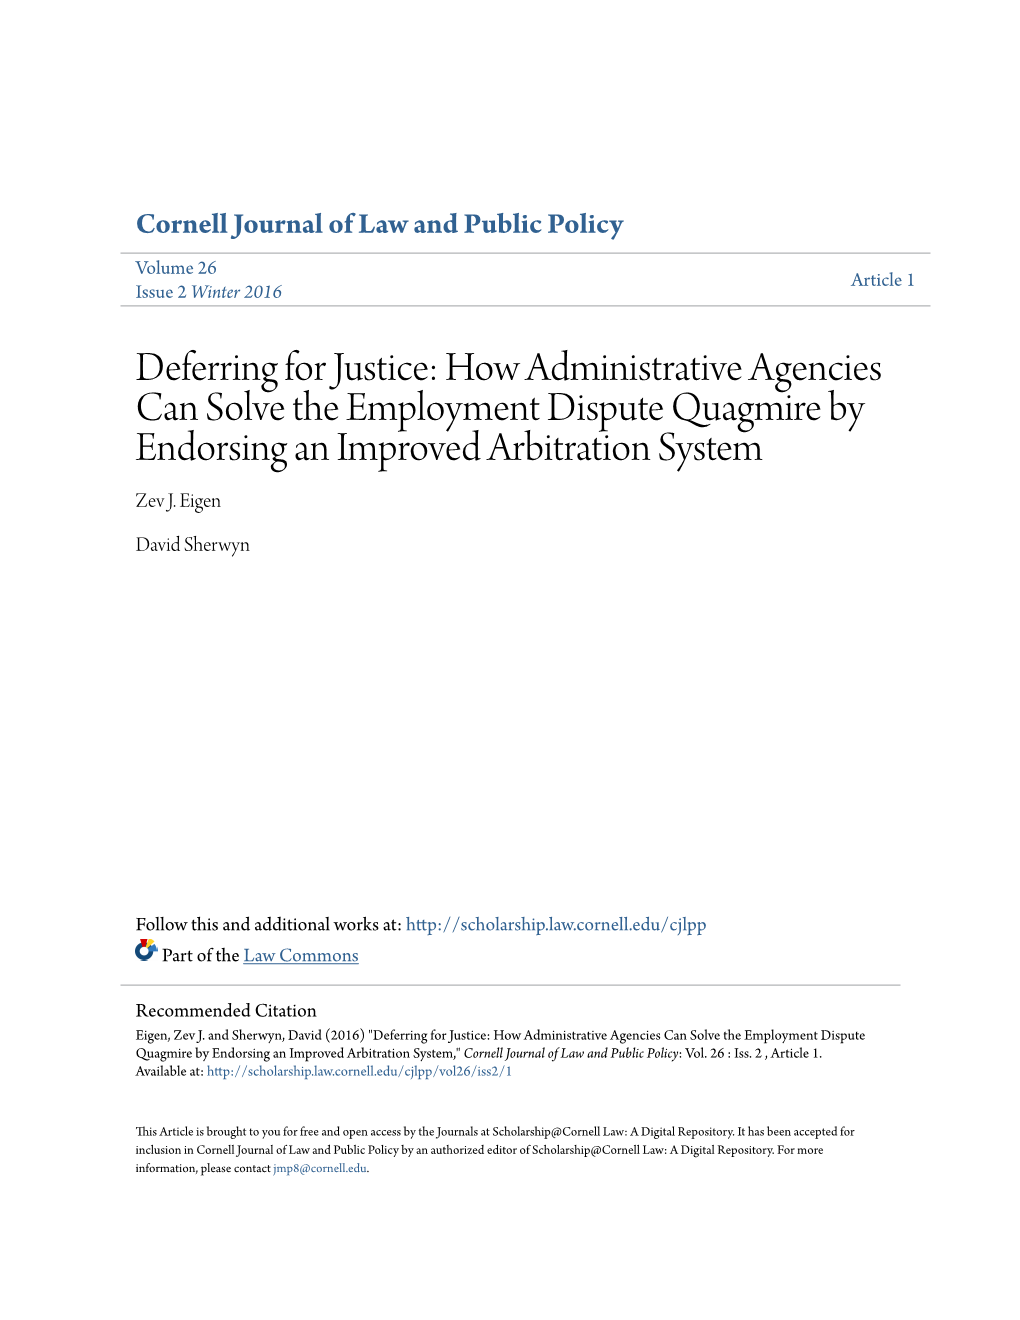 How Administrative Agencies Can Solve the Employment Dispute Quagmire by Endorsing an Improved Arbitration System Zev J